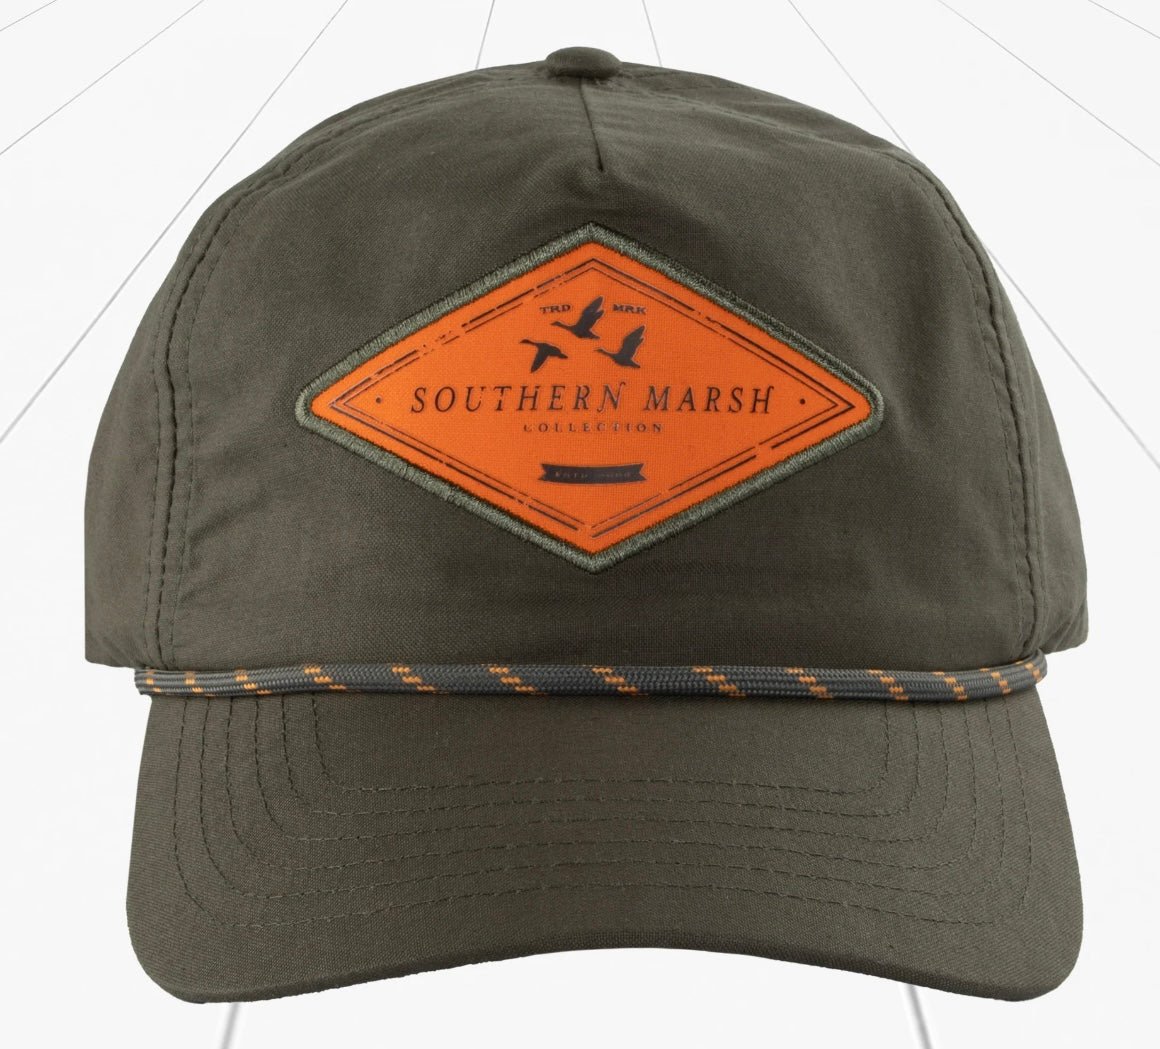 Southern Marsh Ensenada Rope Hat - Duck Patch - Dark Olive - Ball Cap - Jimberly's Boutique